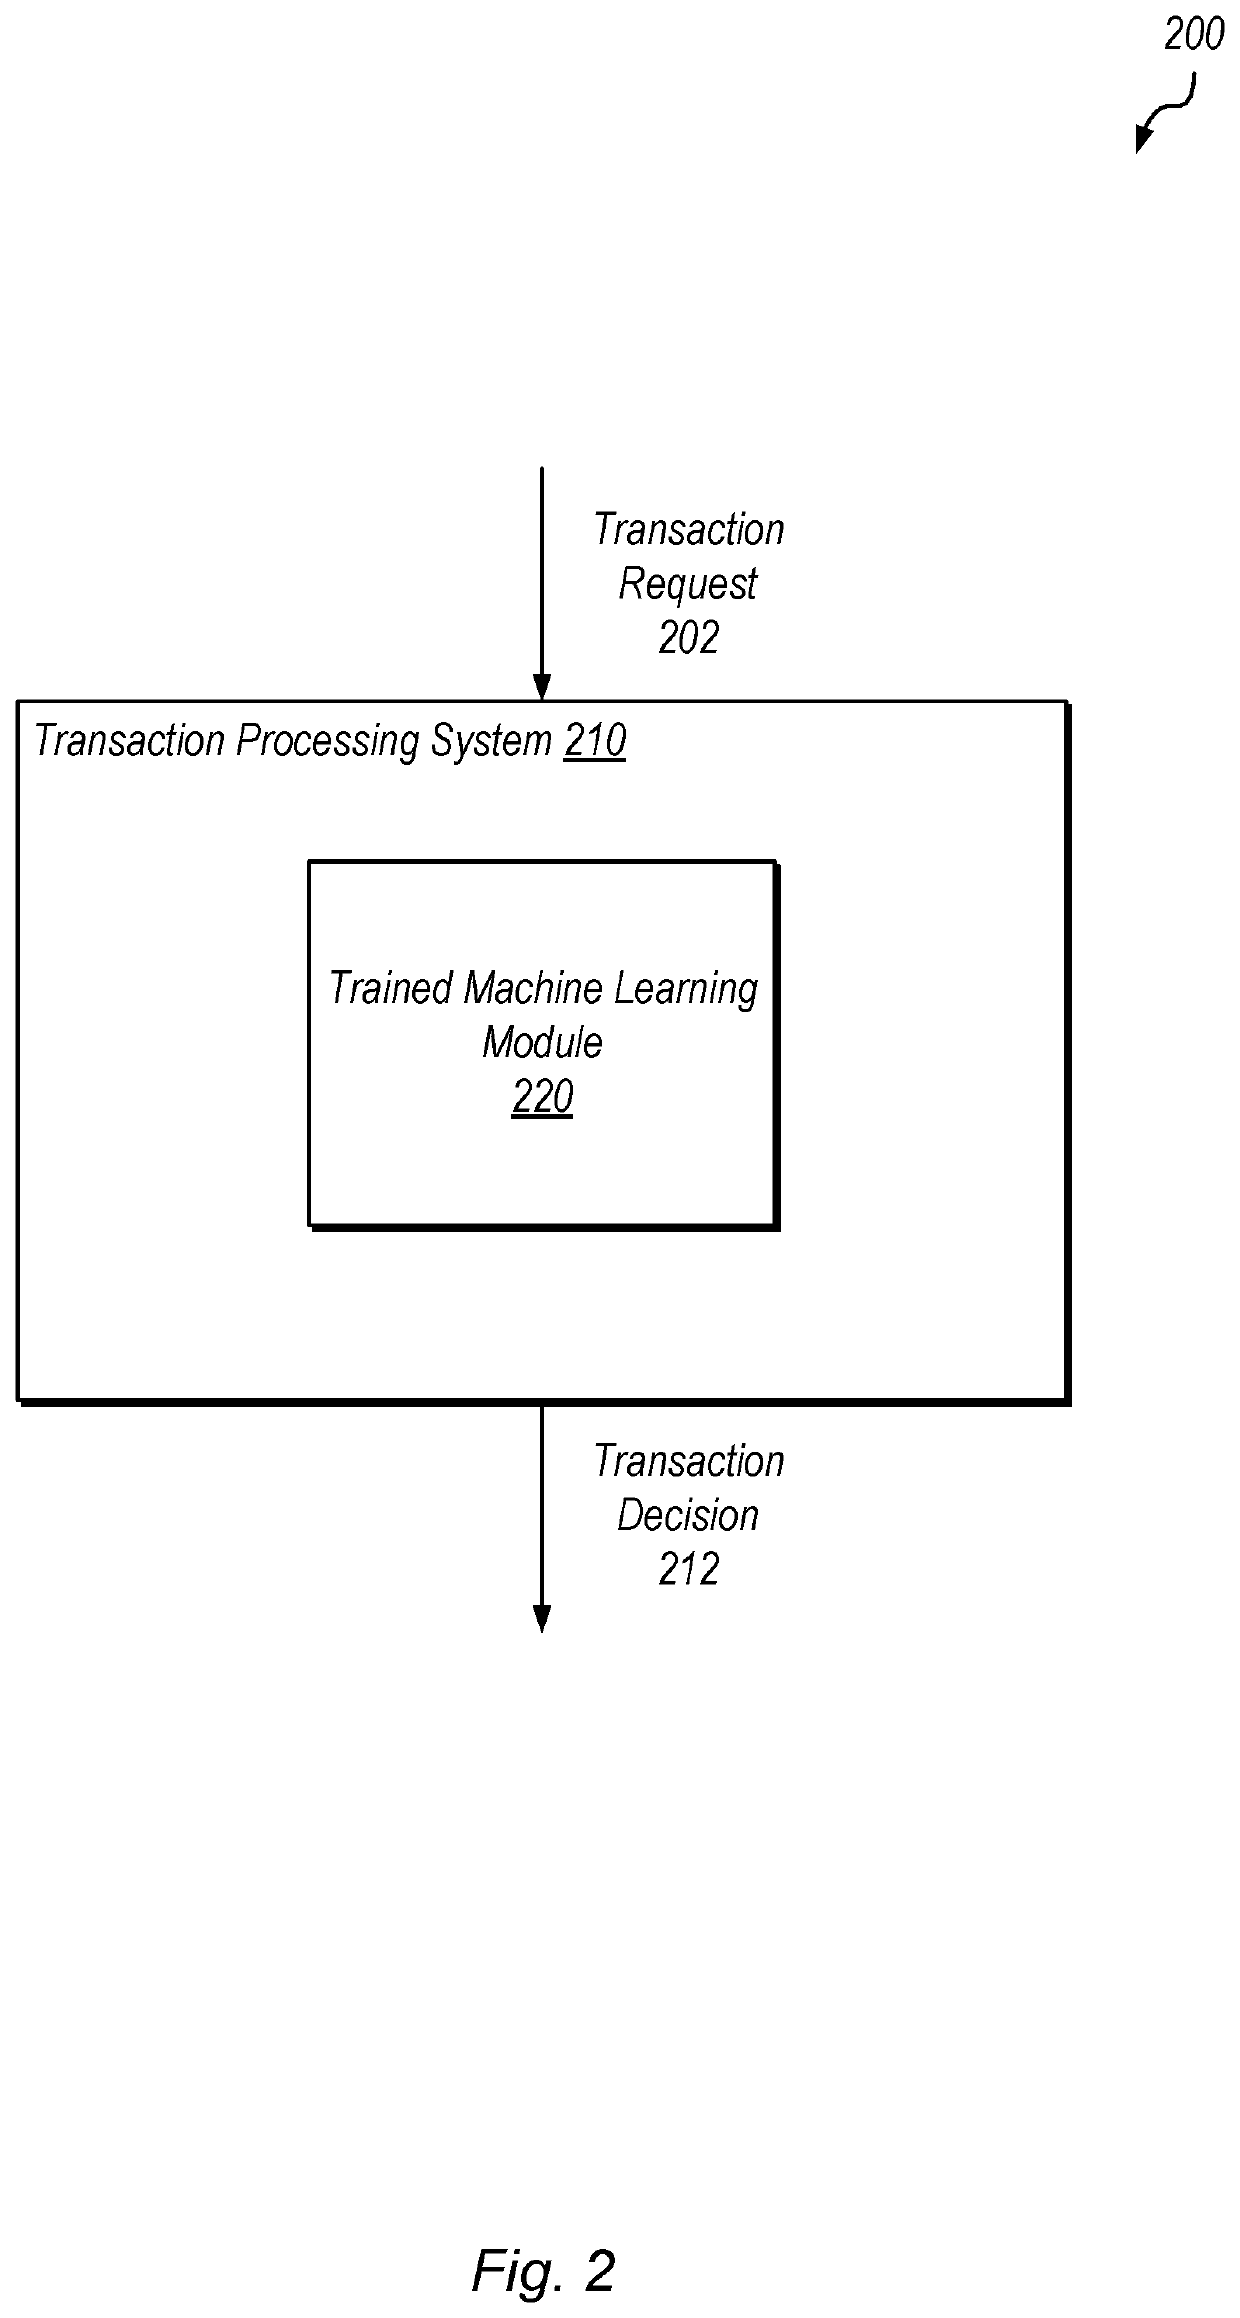 Machine learning module training using input reconstruction techniques and unlabeled transactions